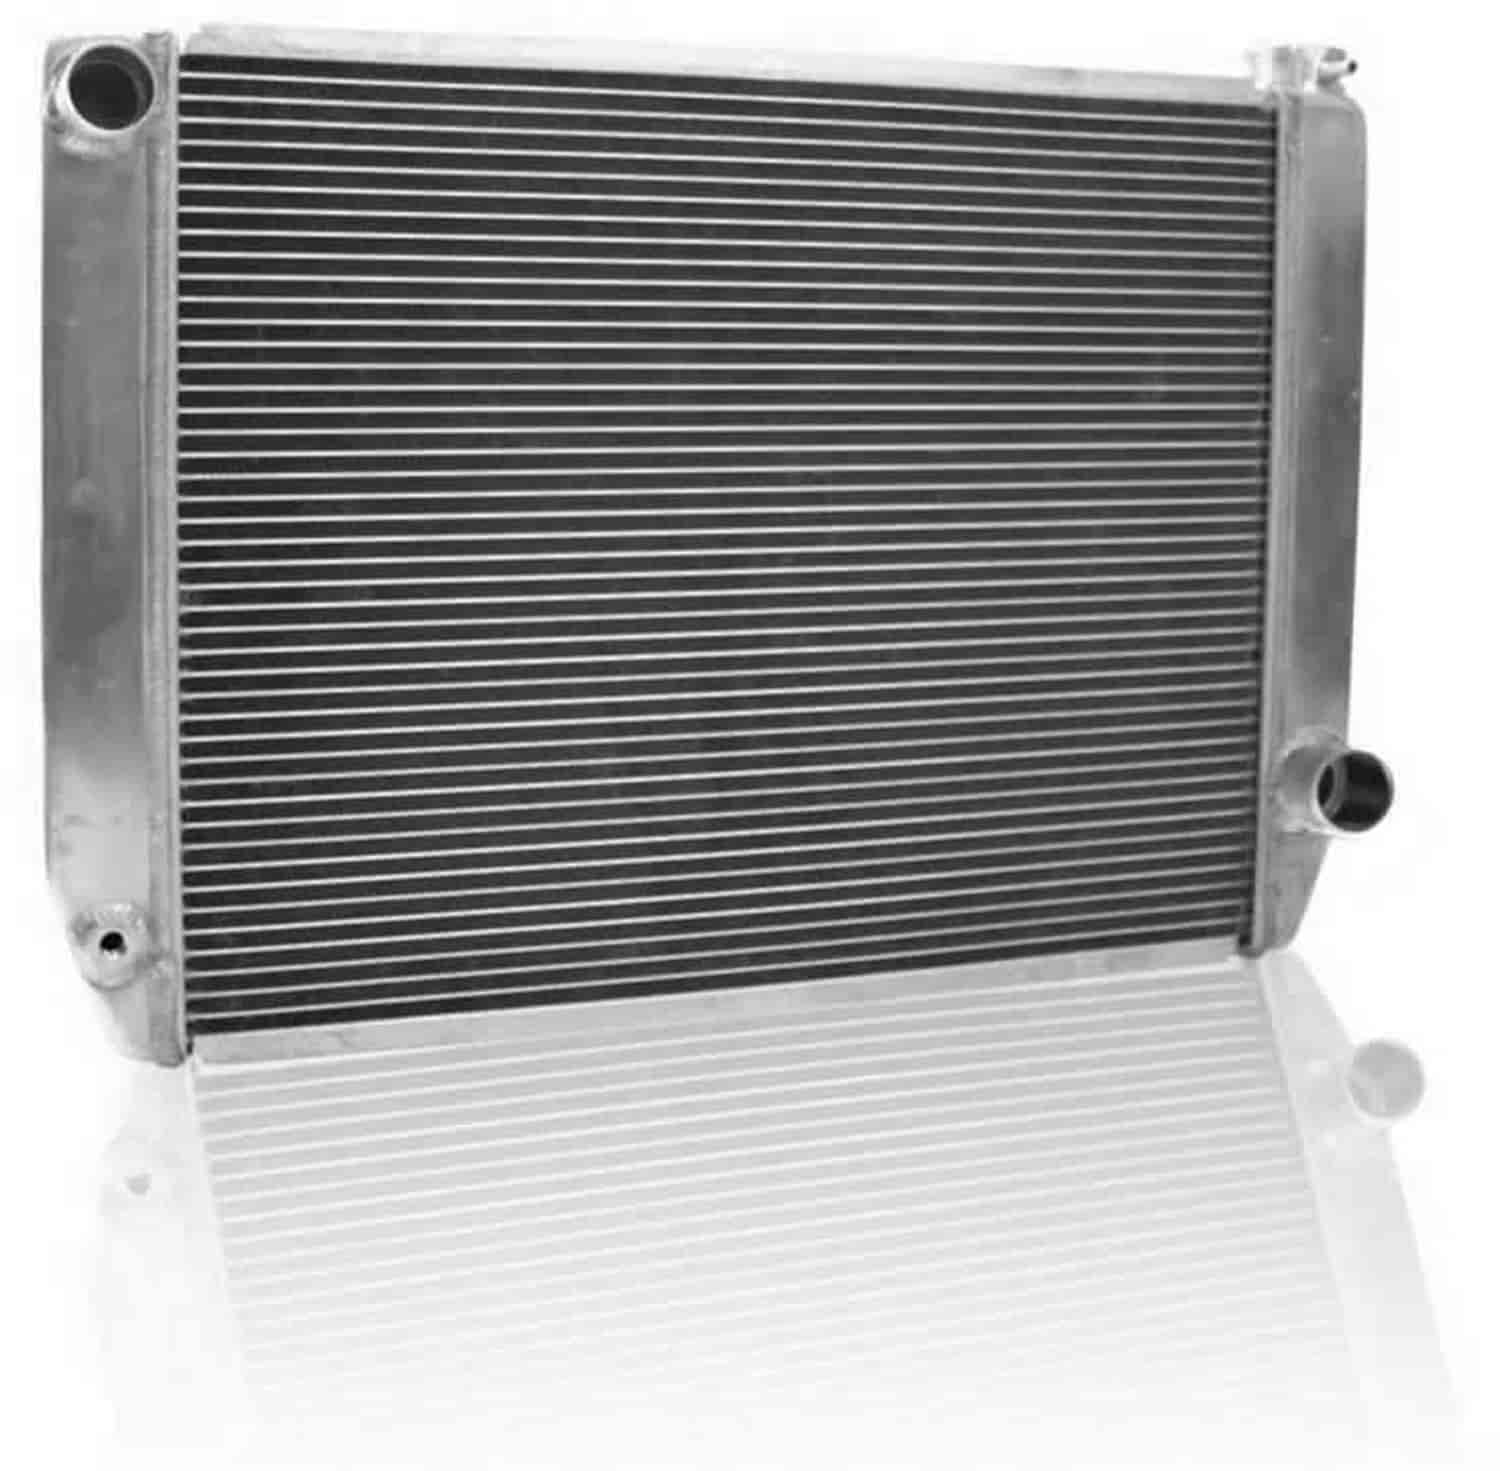 MegaCool Universal Fit Radiator Single Pass Crossflow Design 27.50" x 19" with Straight Outlet